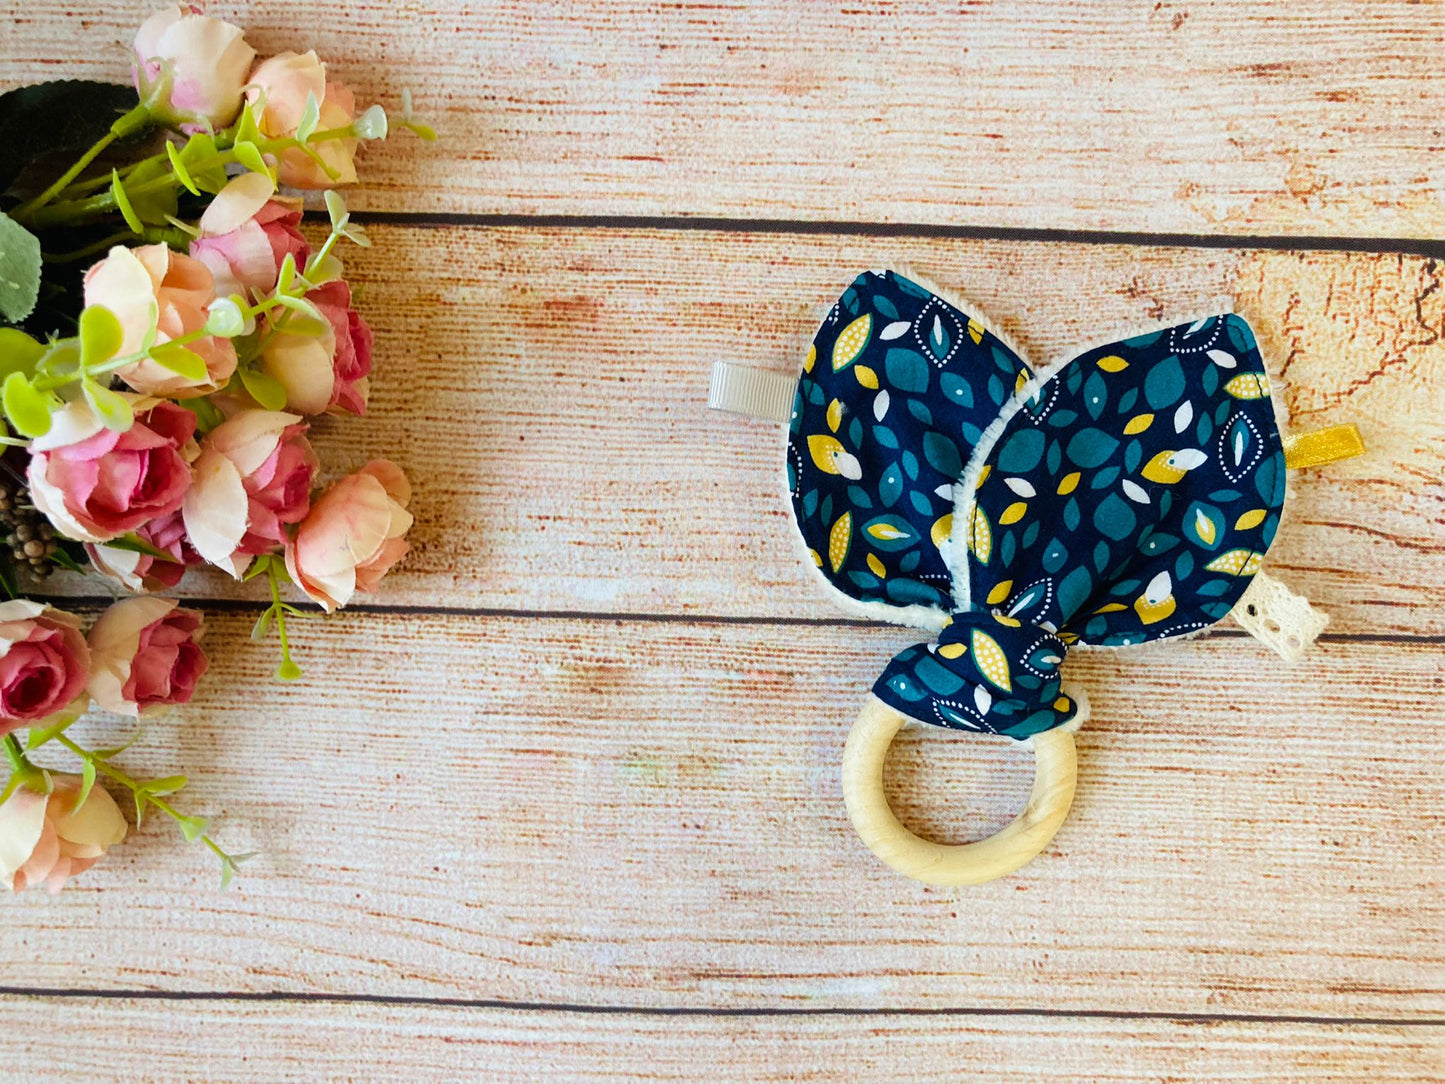 Soft Giraffe toy, Bunny ear teether and pacifier holder - perfect baby gift set, Blue leaves